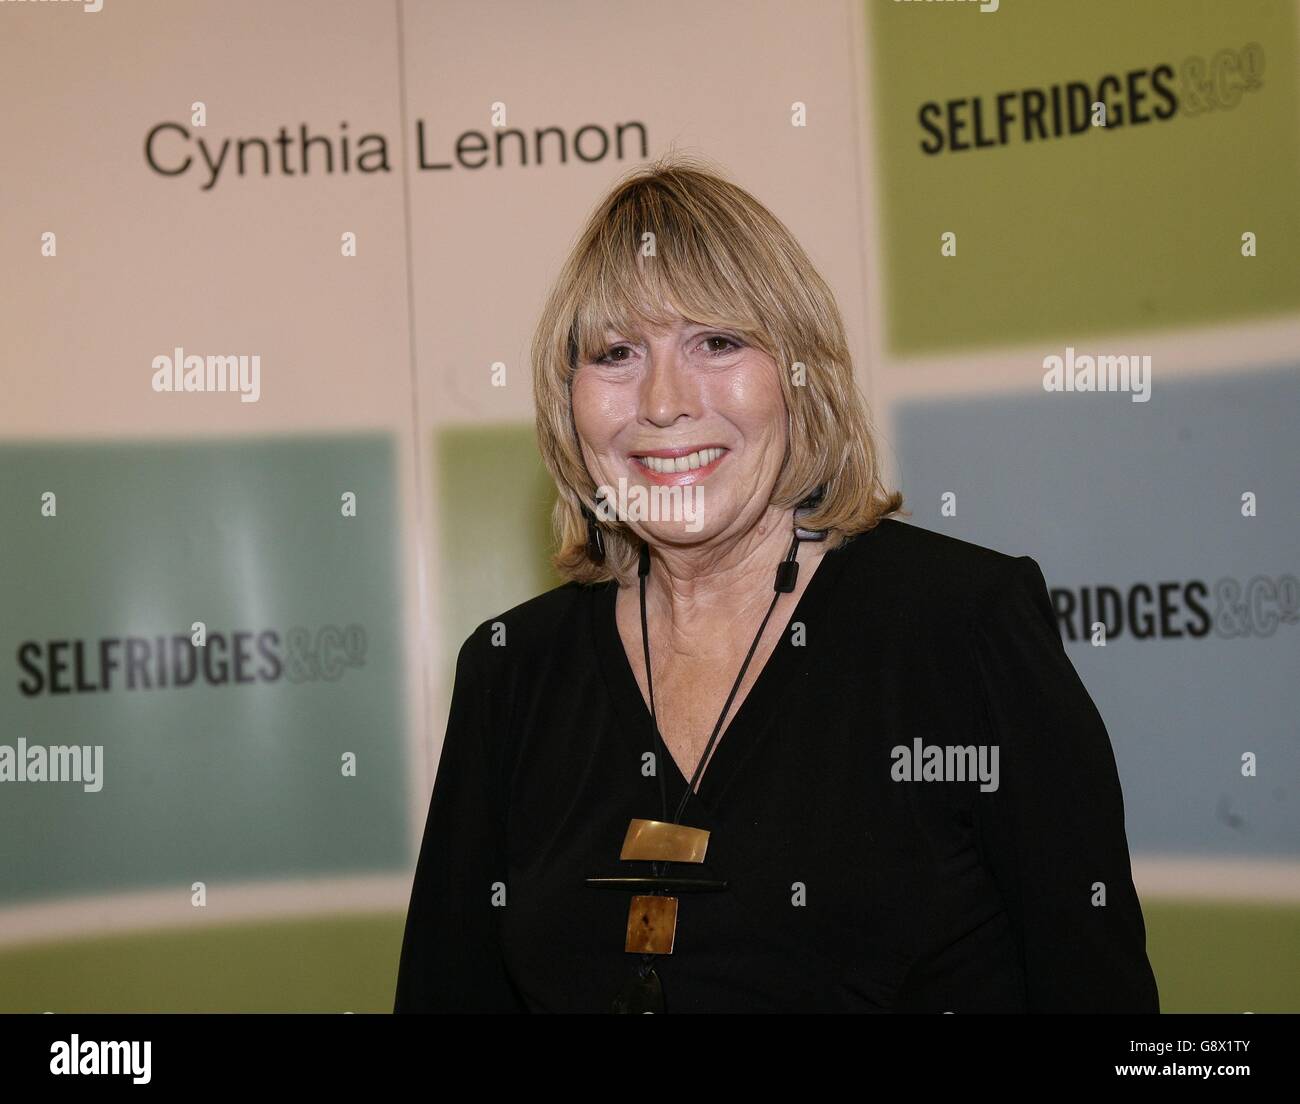 Cynthia Lennon attends a book signing to celebrate the launch of her book, 'John', about her life with John Lennon. Stock Photo